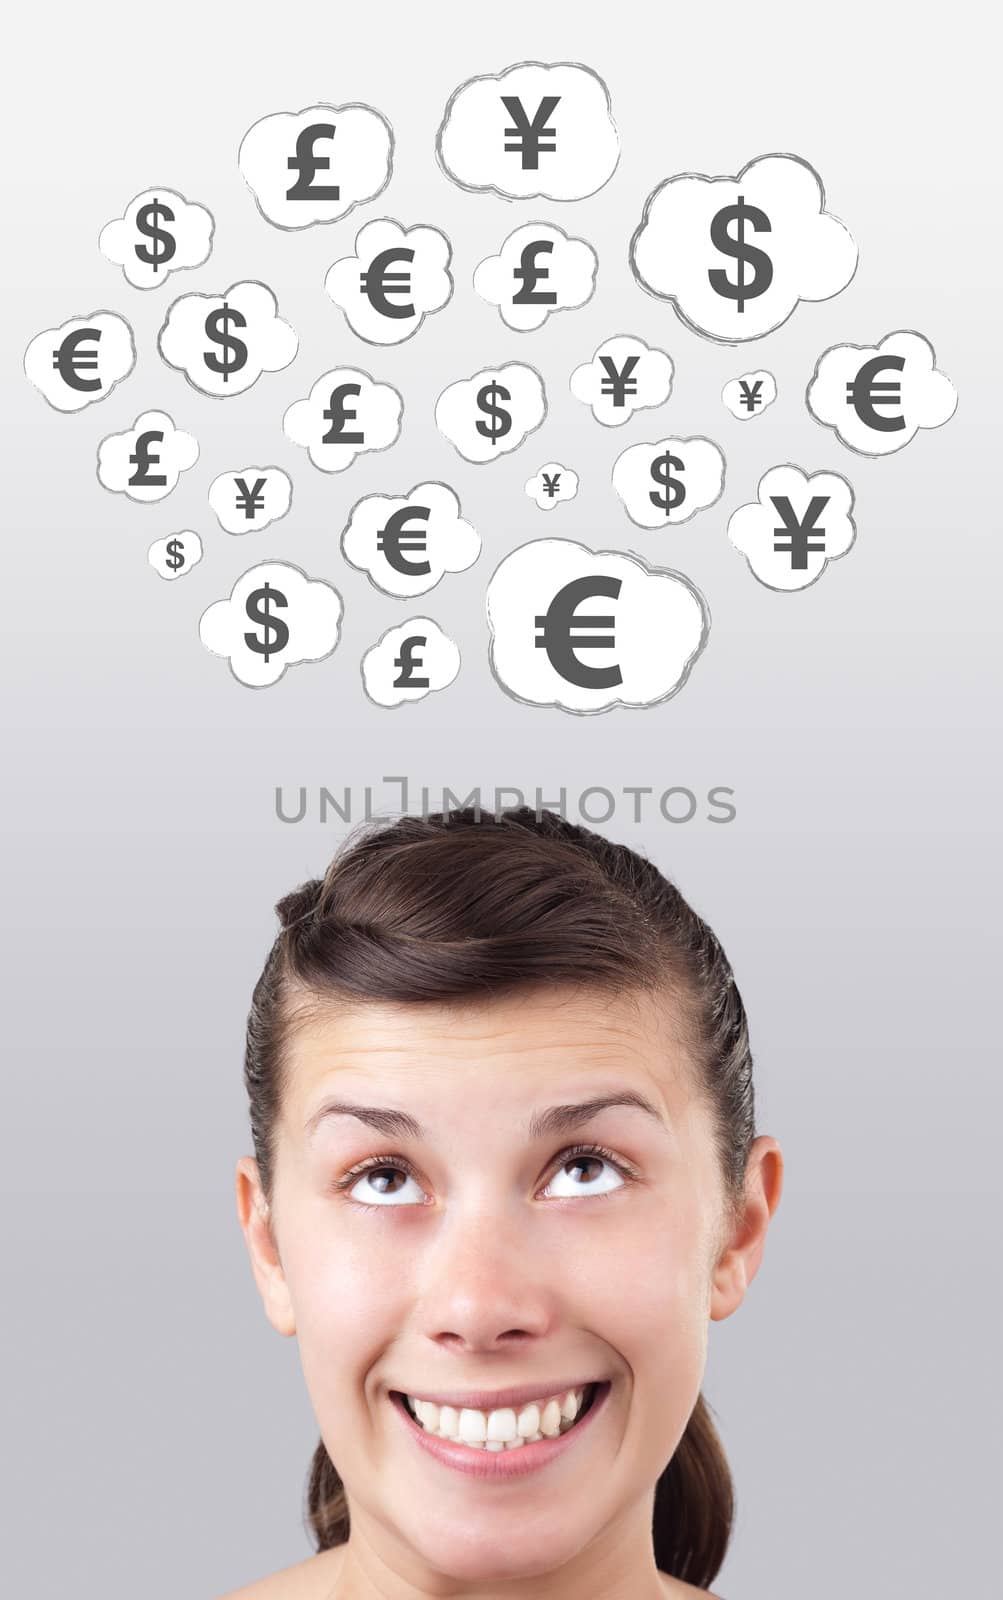 Young girl head looking at business icons and images by ra2studio